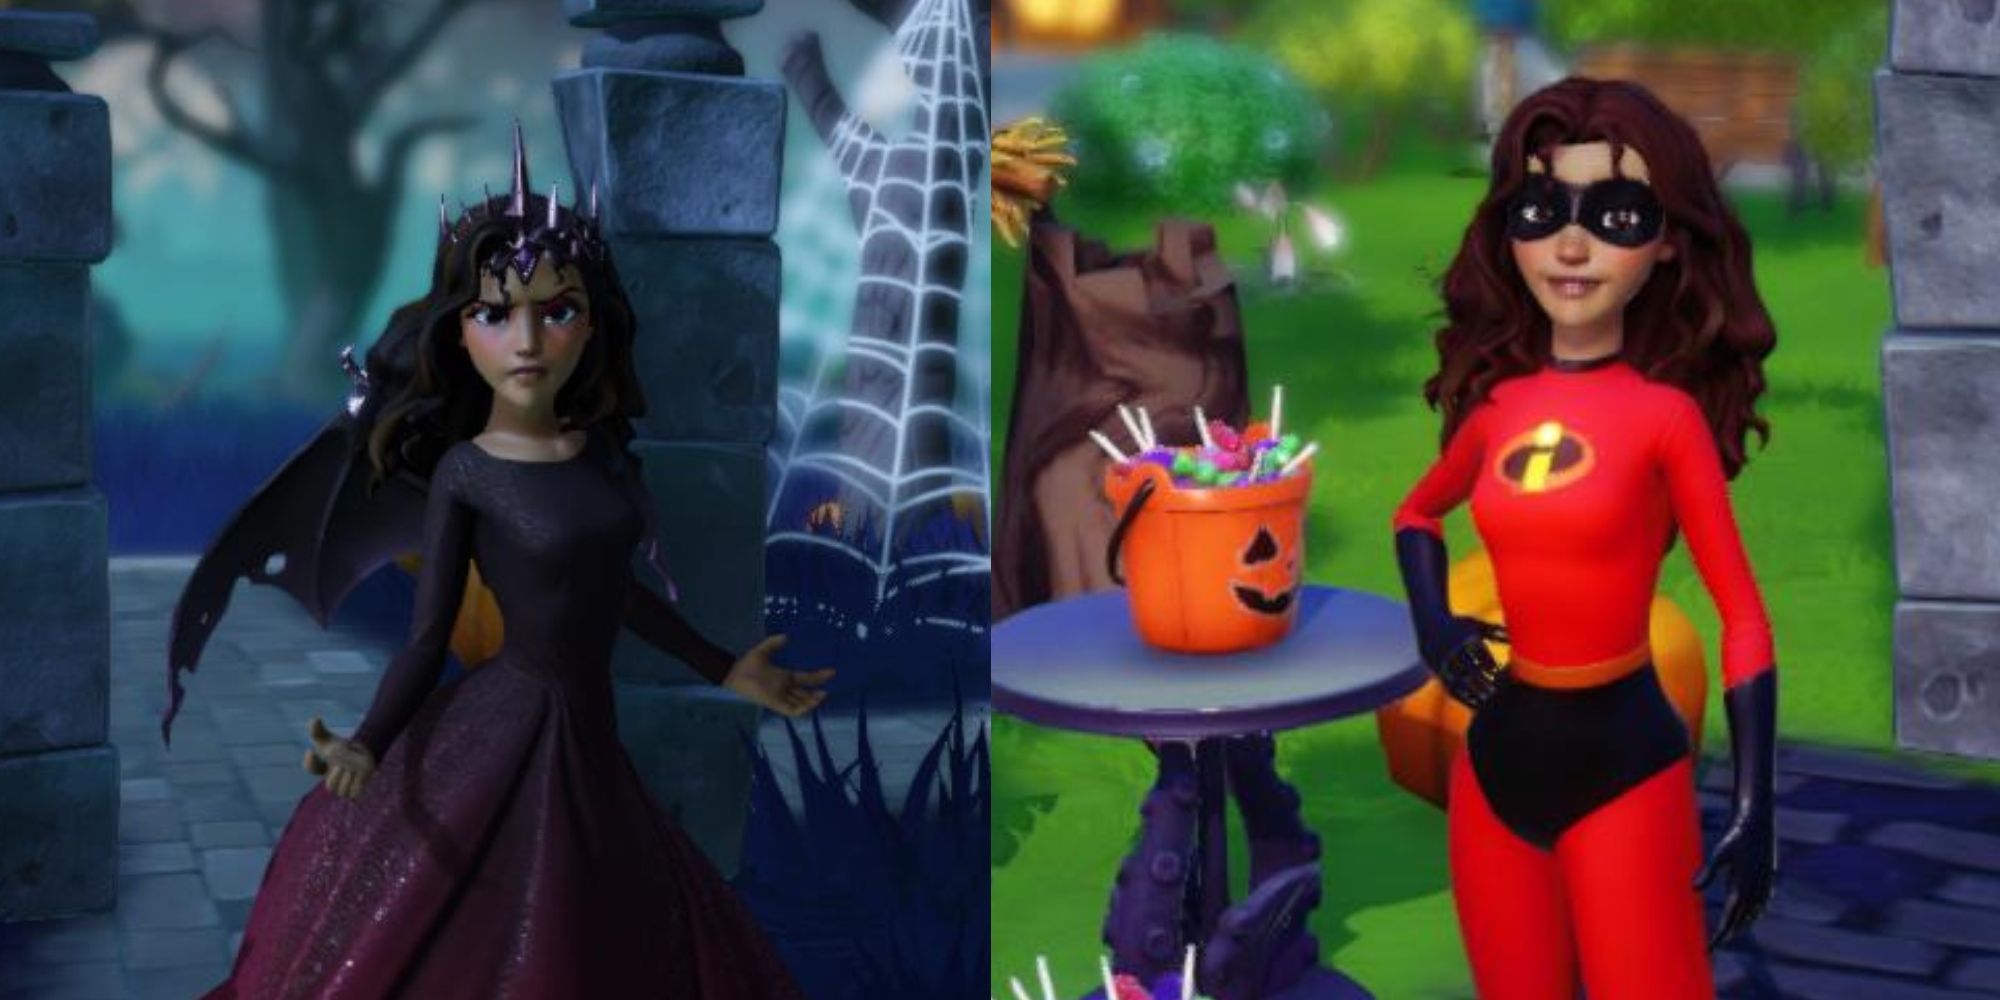 Disney Dreamlight Valley Character In Dark Gown and Characer In Incredibles Costume